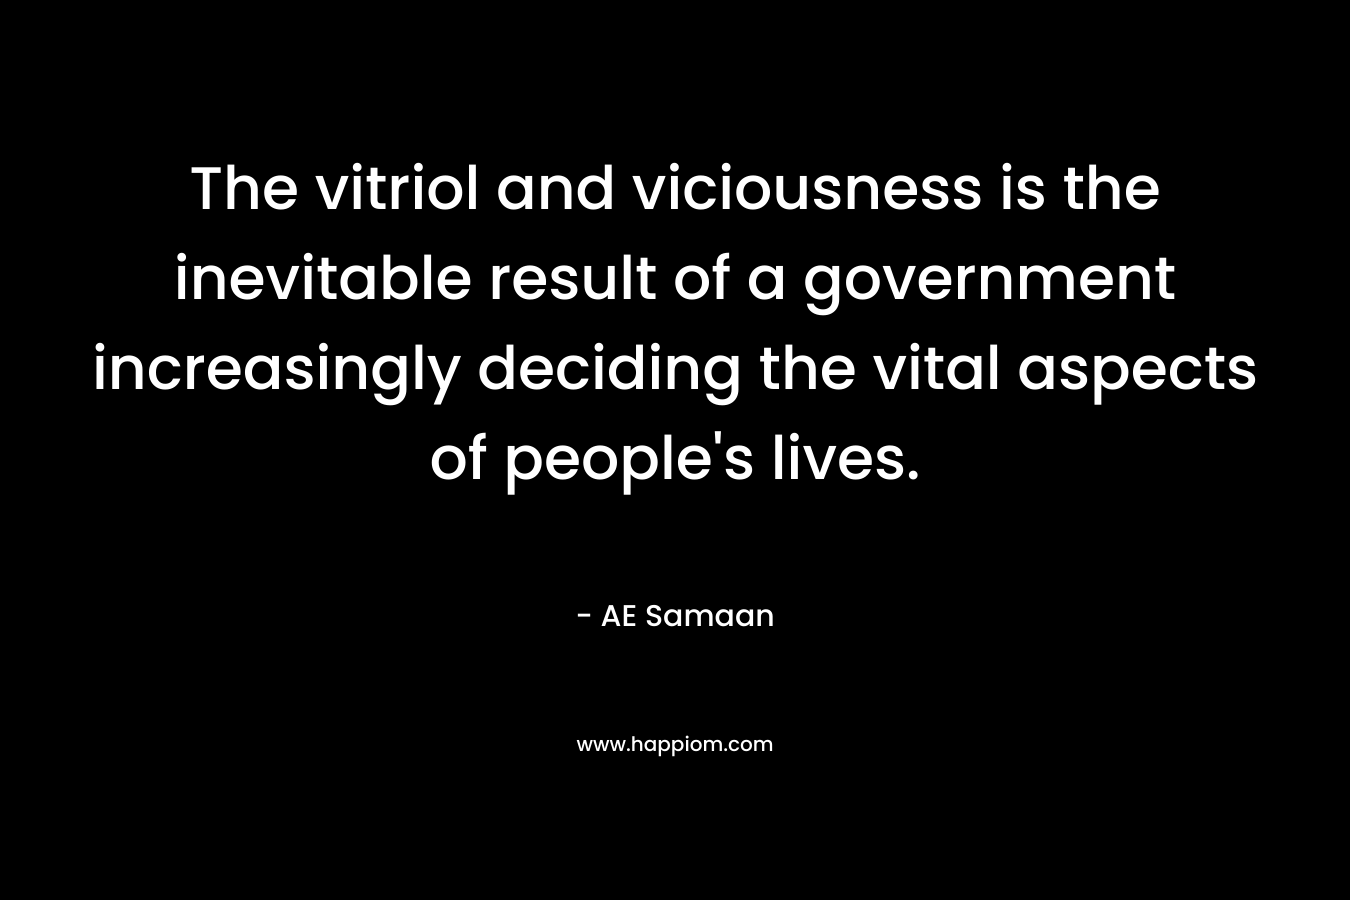 The vitriol and viciousness is the inevitable result of a government increasingly deciding the vital aspects of people's lives.